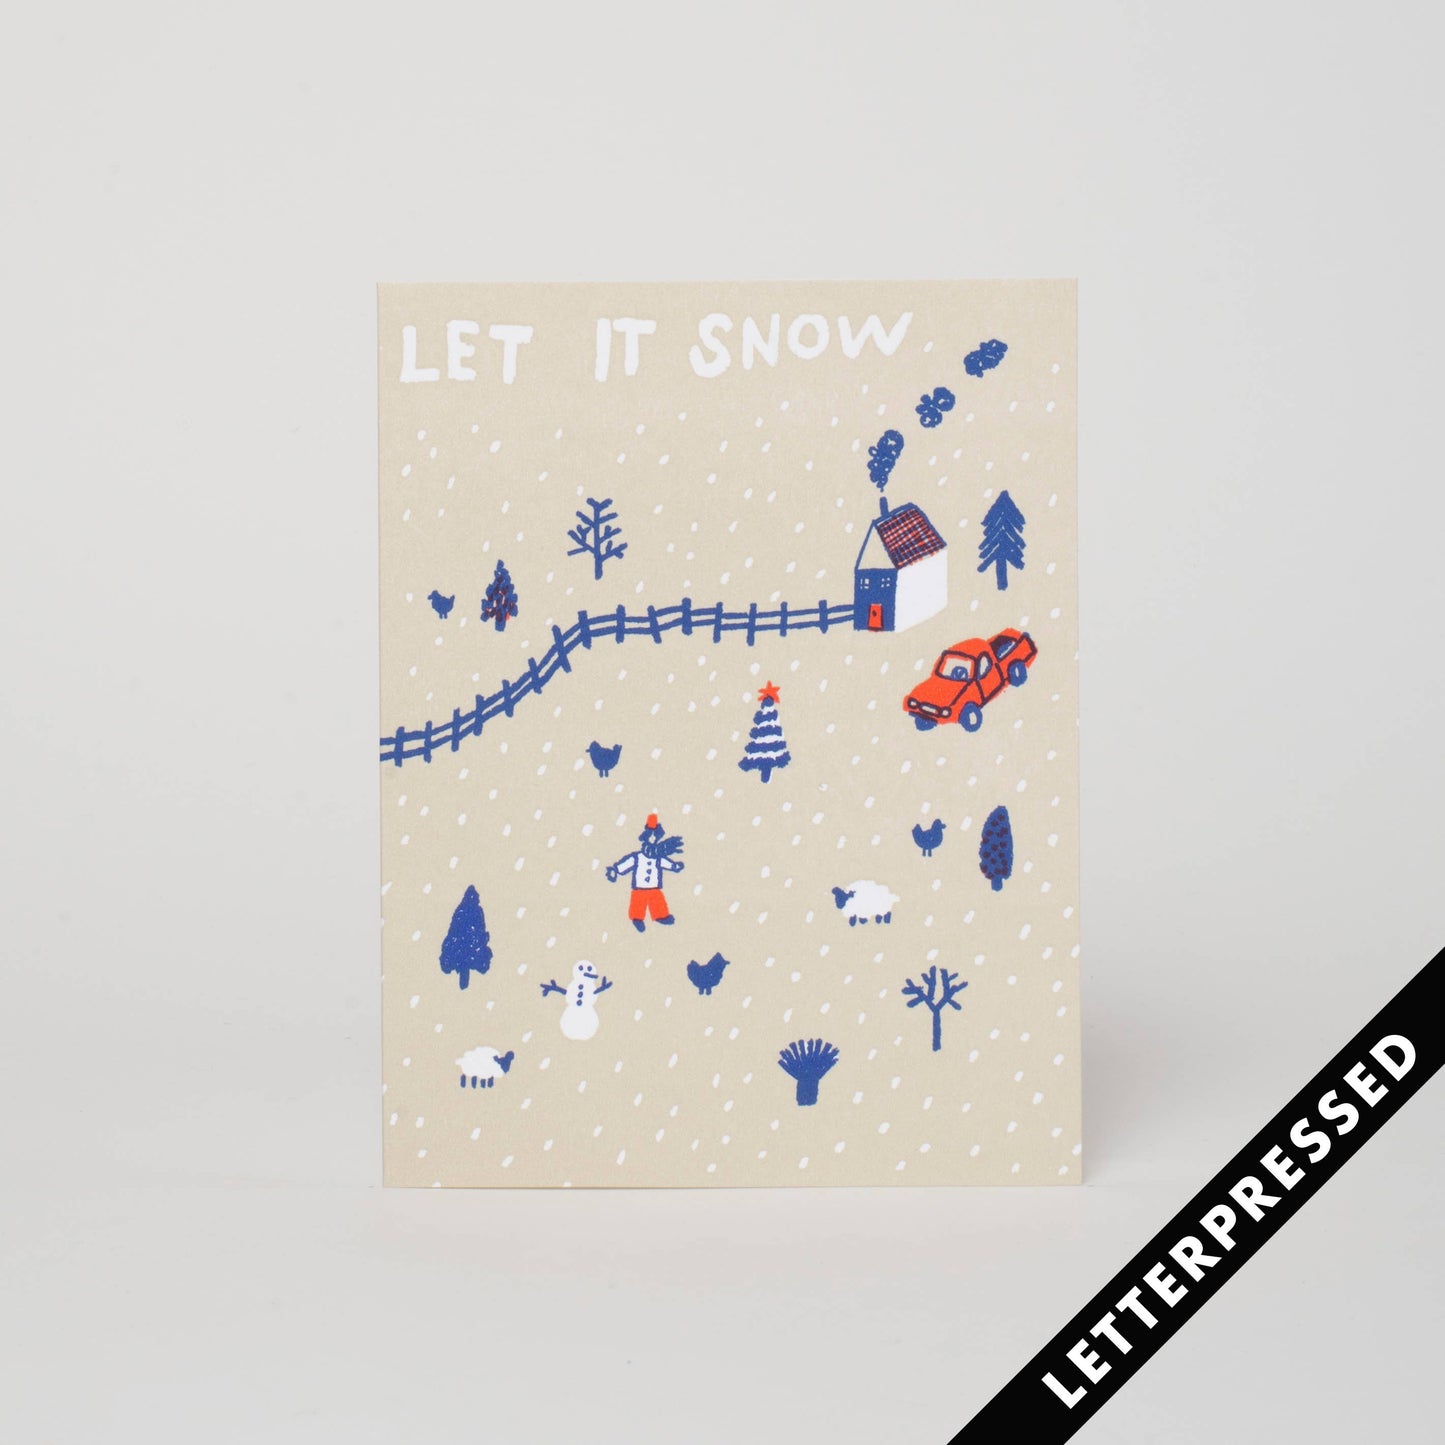 Let It Snow card, letter-pressed by Egg Press Manufacturing.